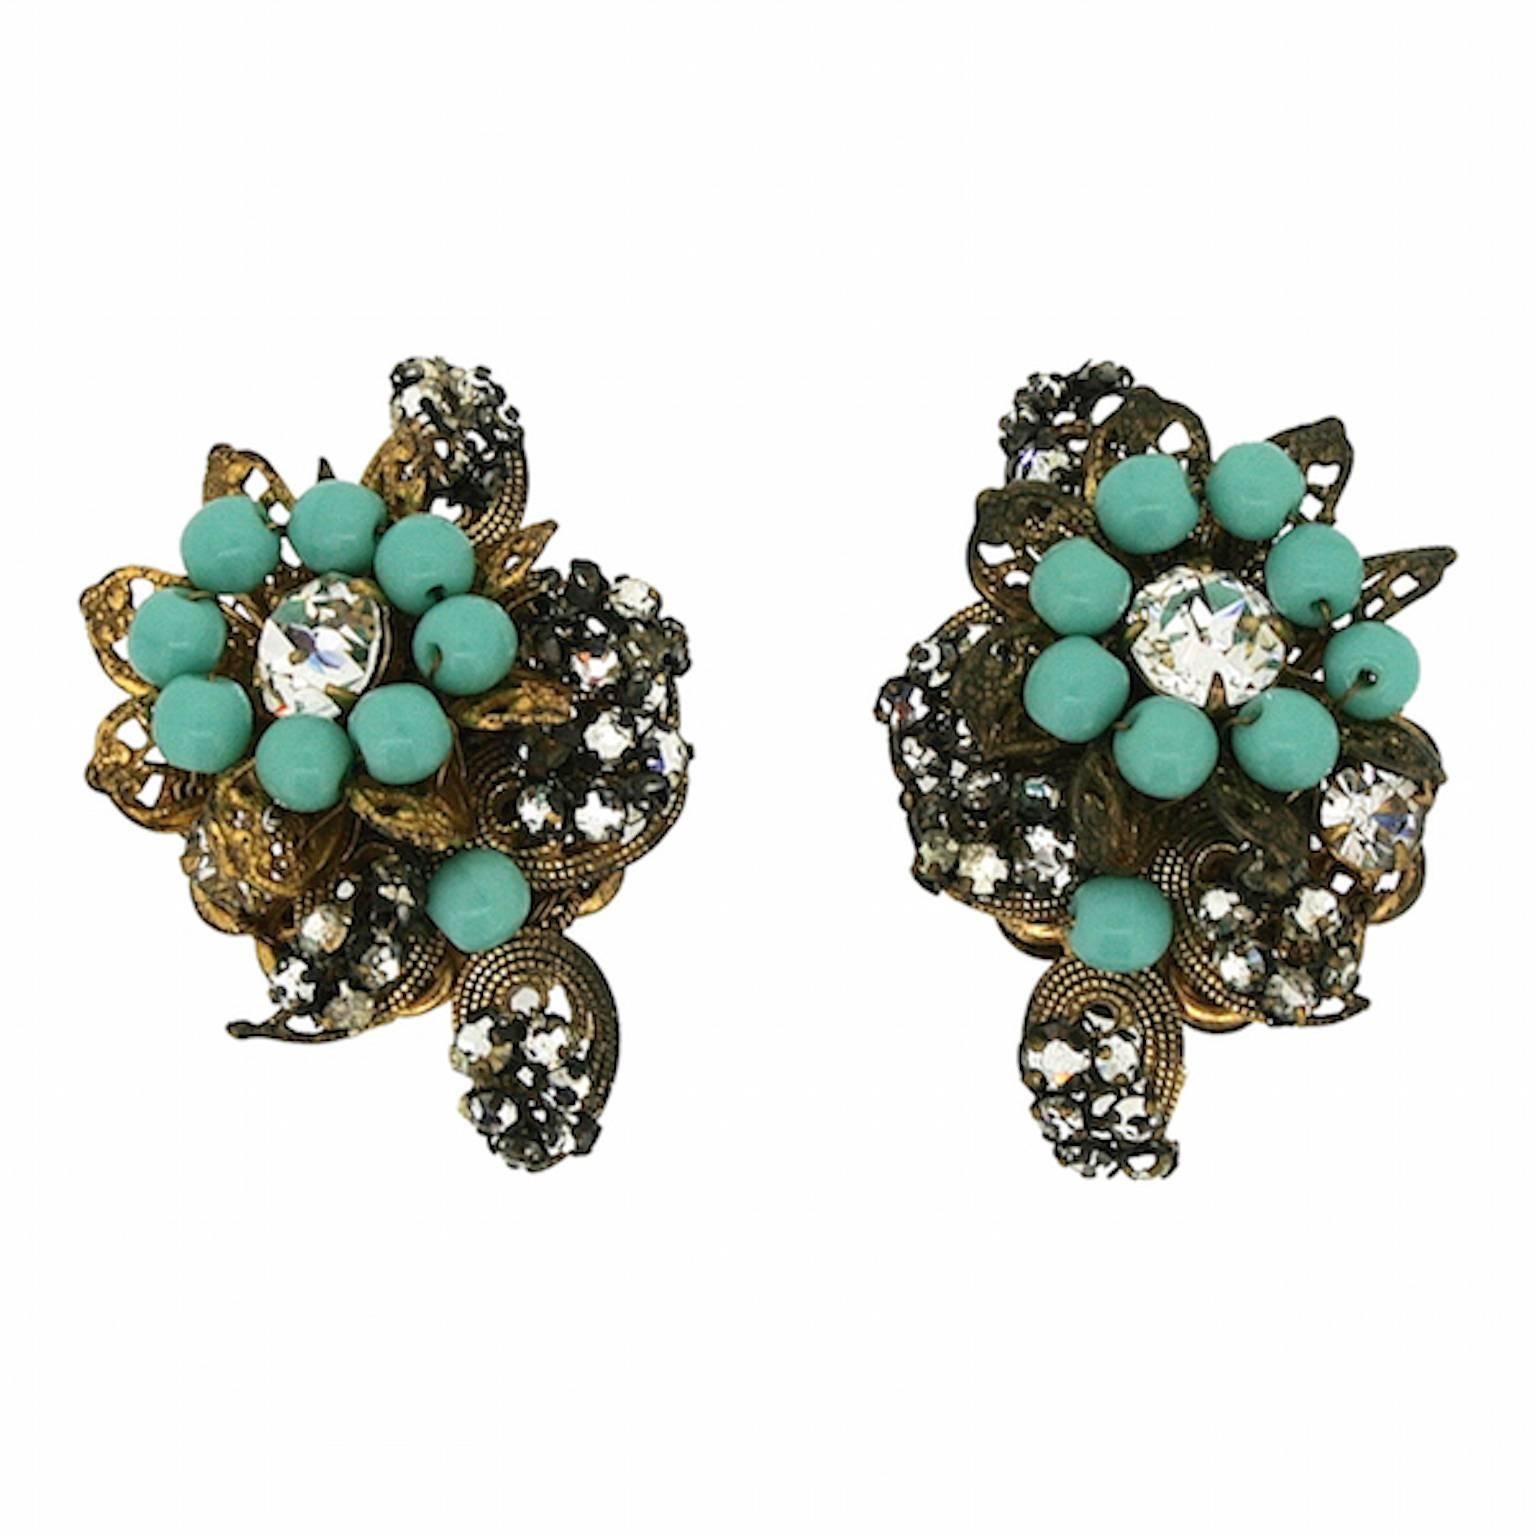 Miriam Haskell 1950s Rhinestone & Turquoise Glass Vintage Earrings  For Sale